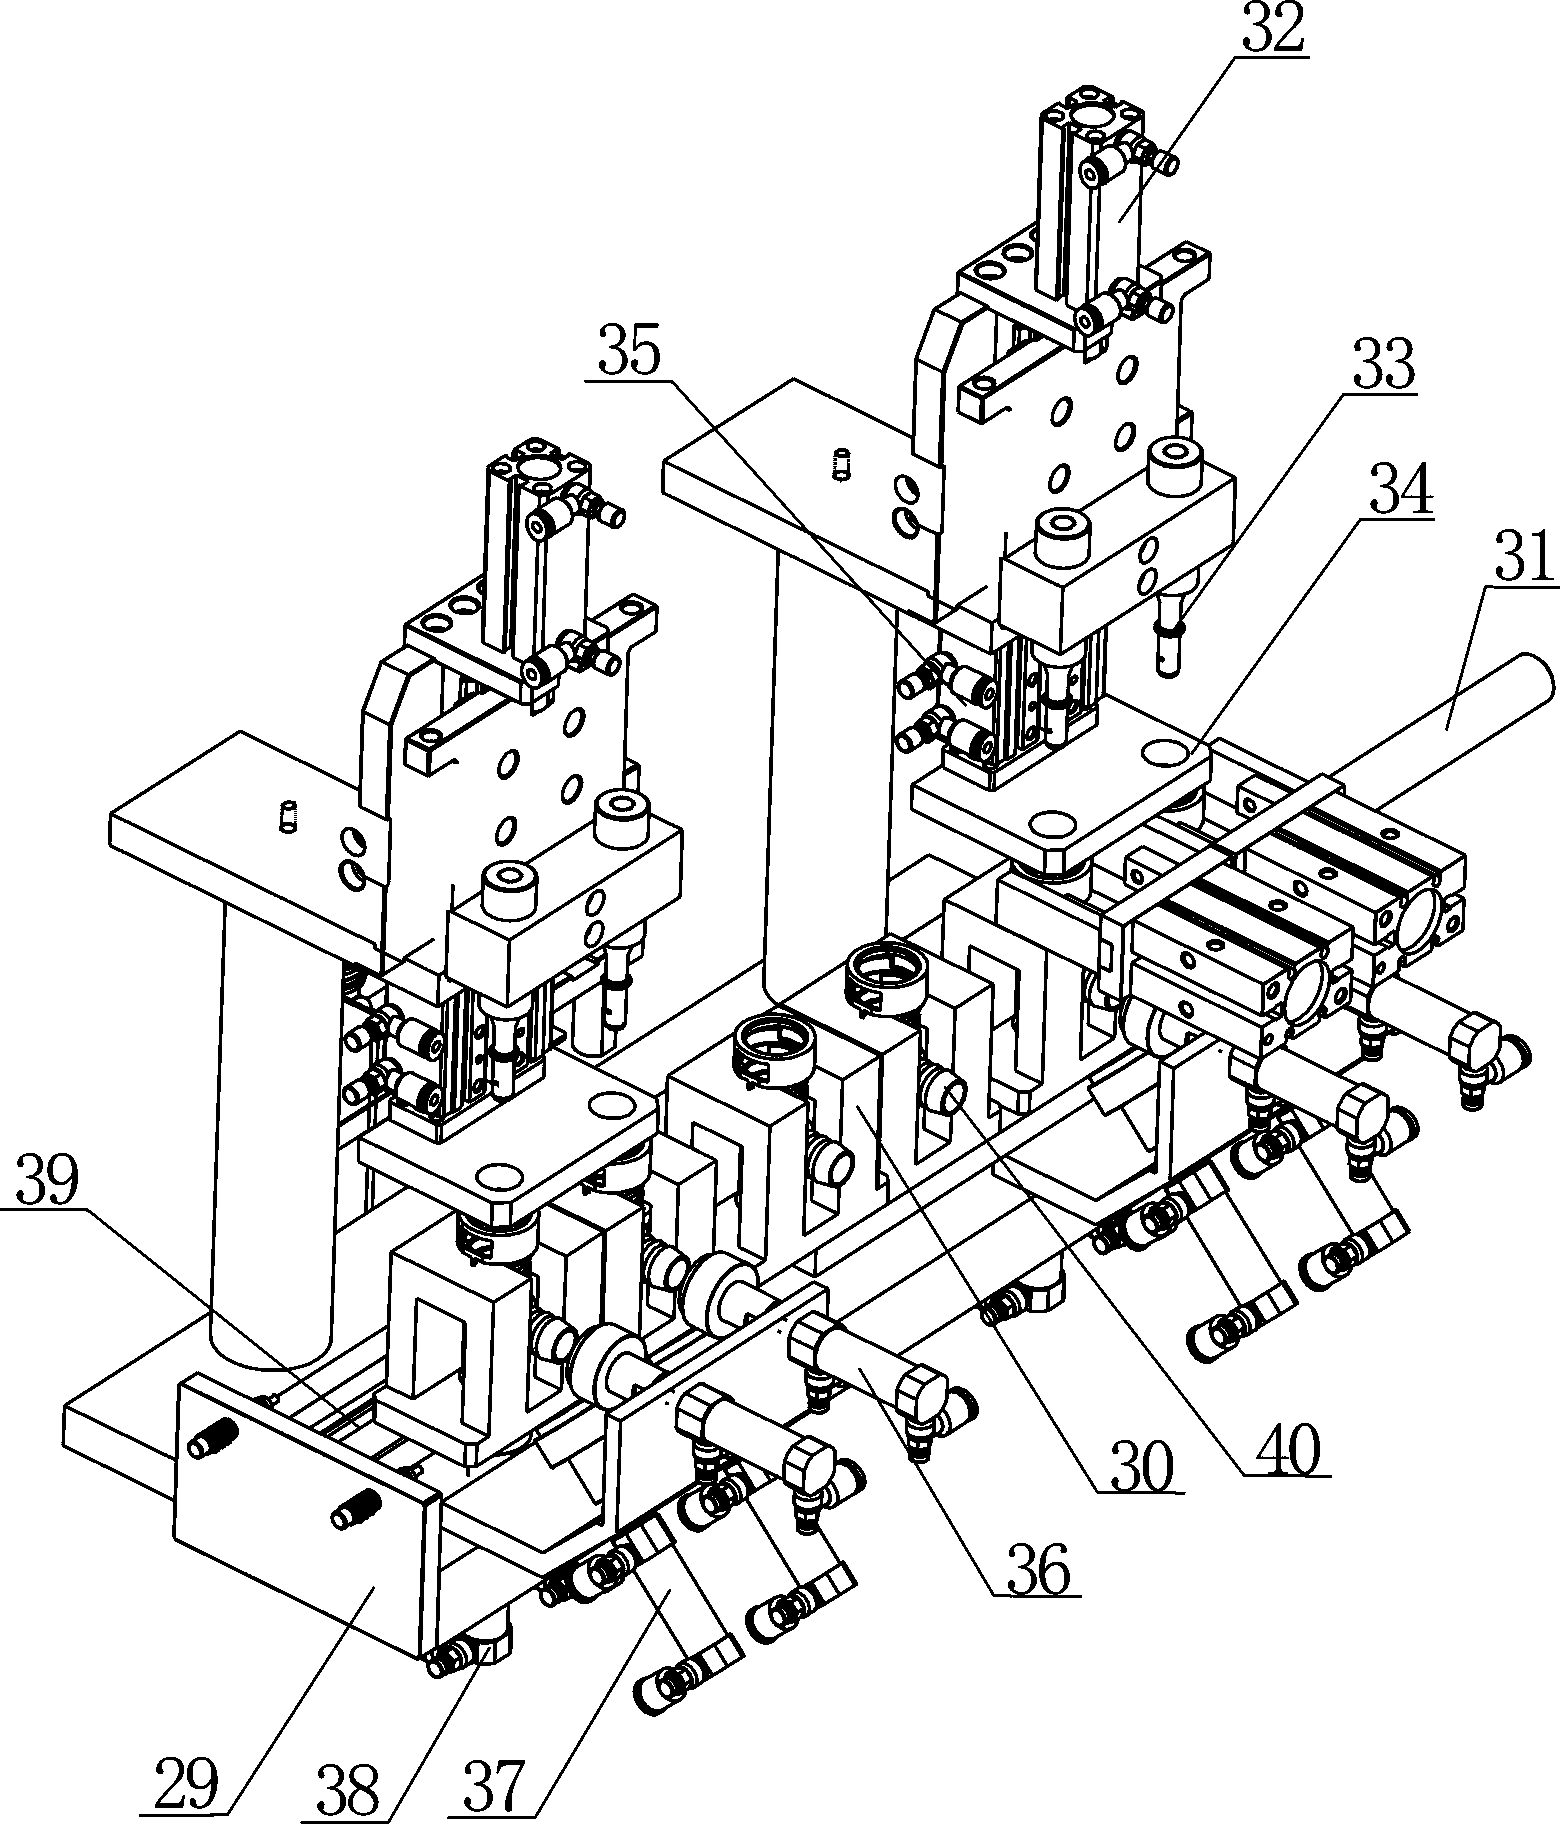 Assembling machine for multiple types of pipe joints